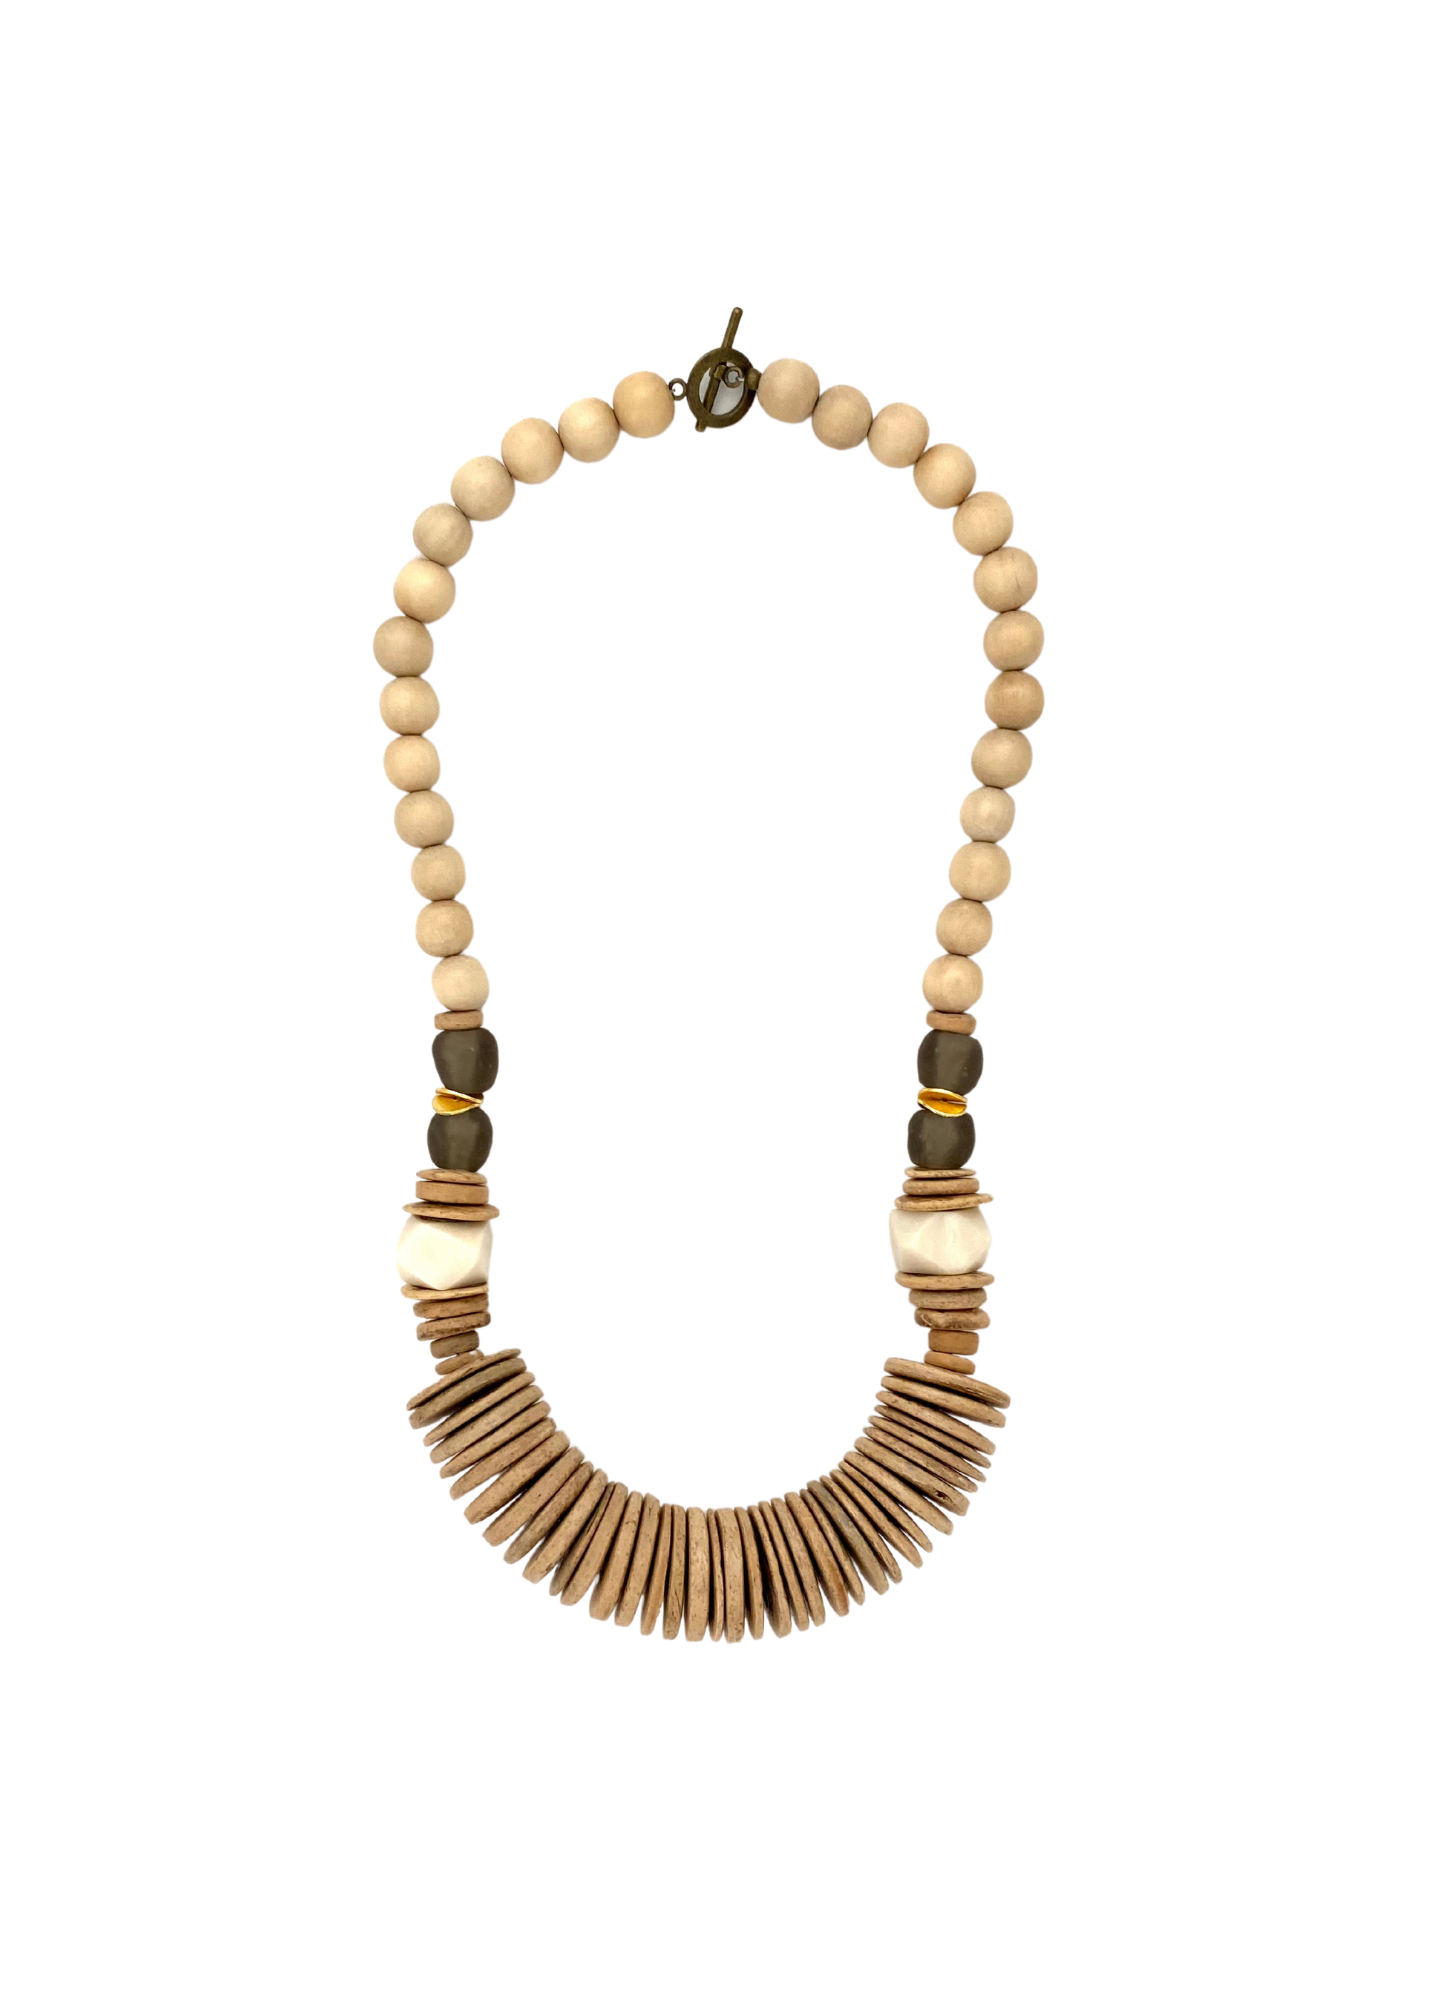 Wyoming Necklace - Natural Wood & Gray